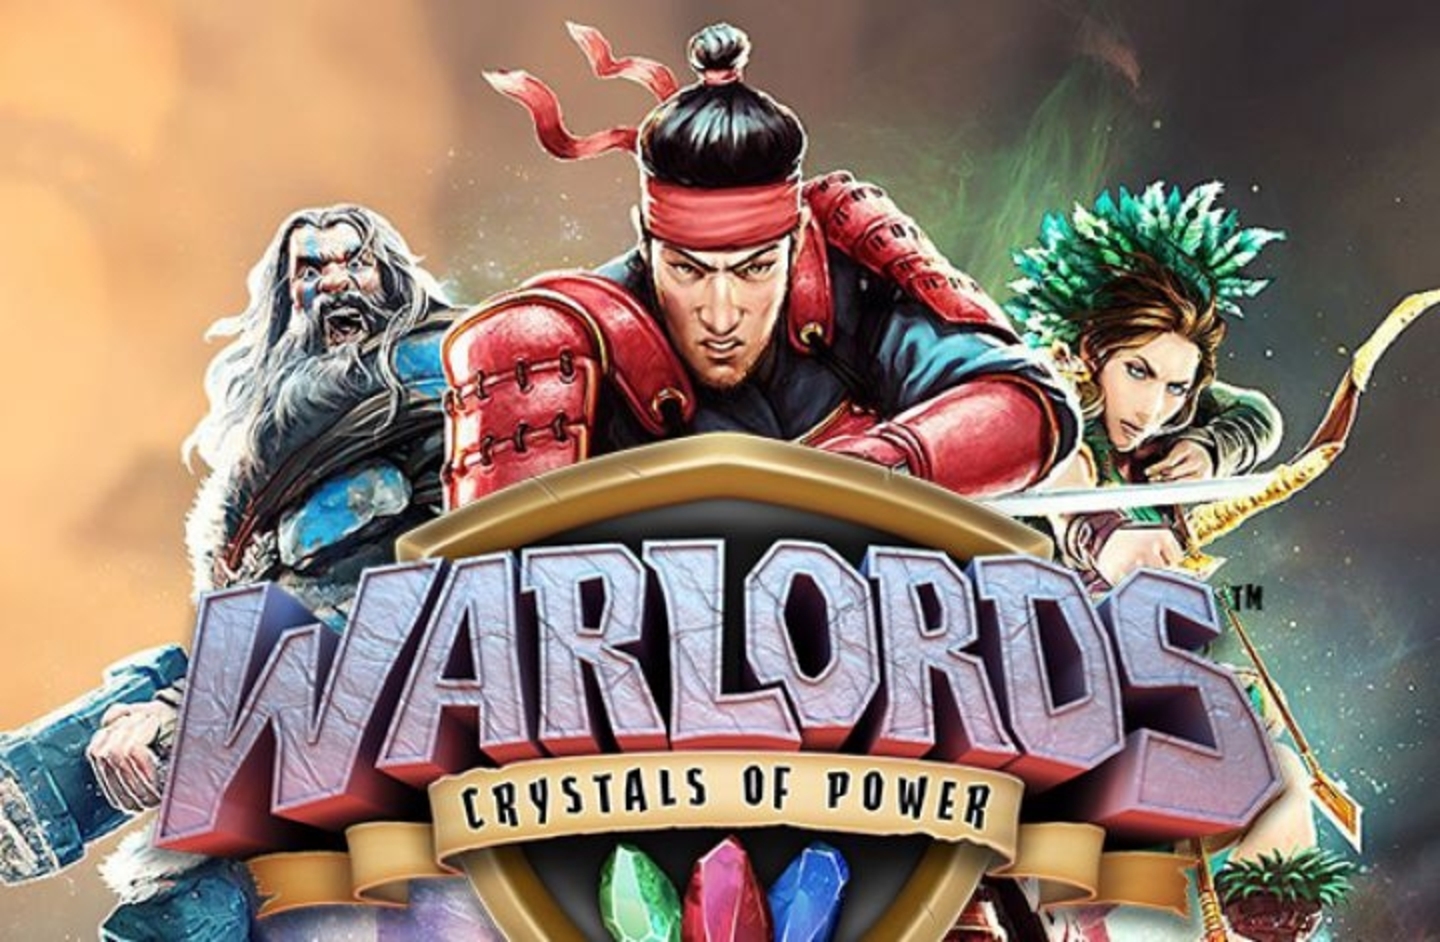 Warlords: Crystals of Power demo